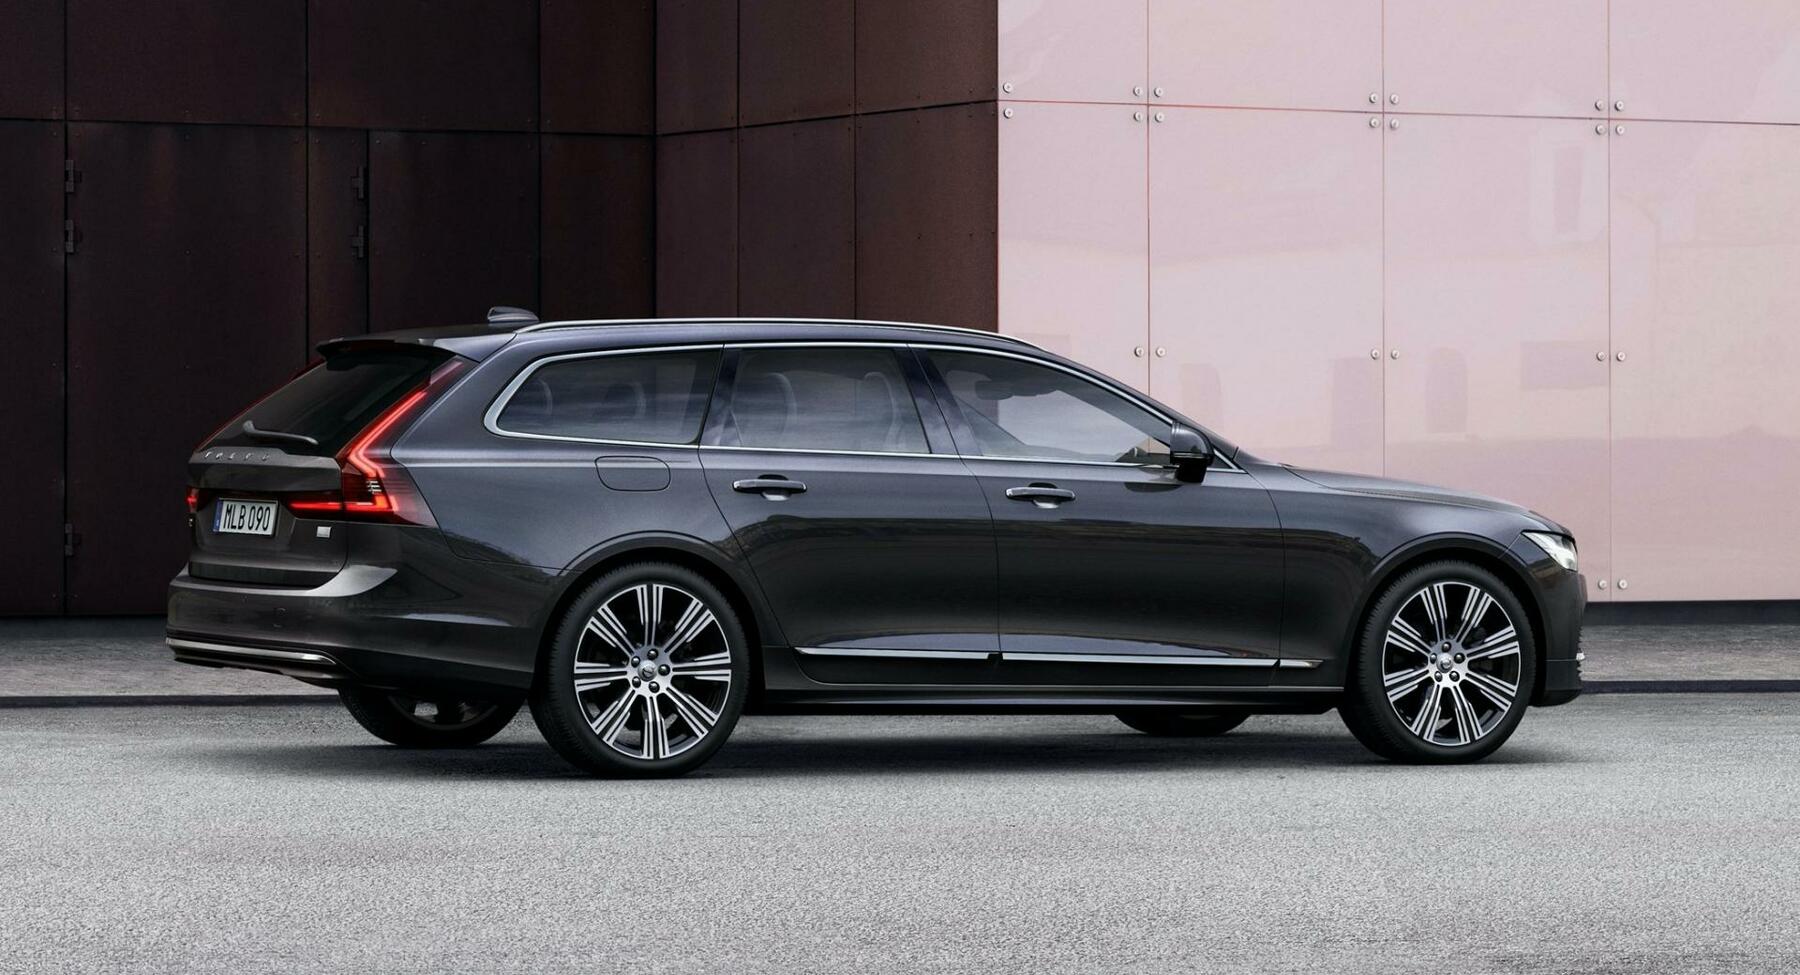 Volvo V90 Cross Country 2.0 T6 (310 Hp) AWD Automatic 2018, 2019, 2020